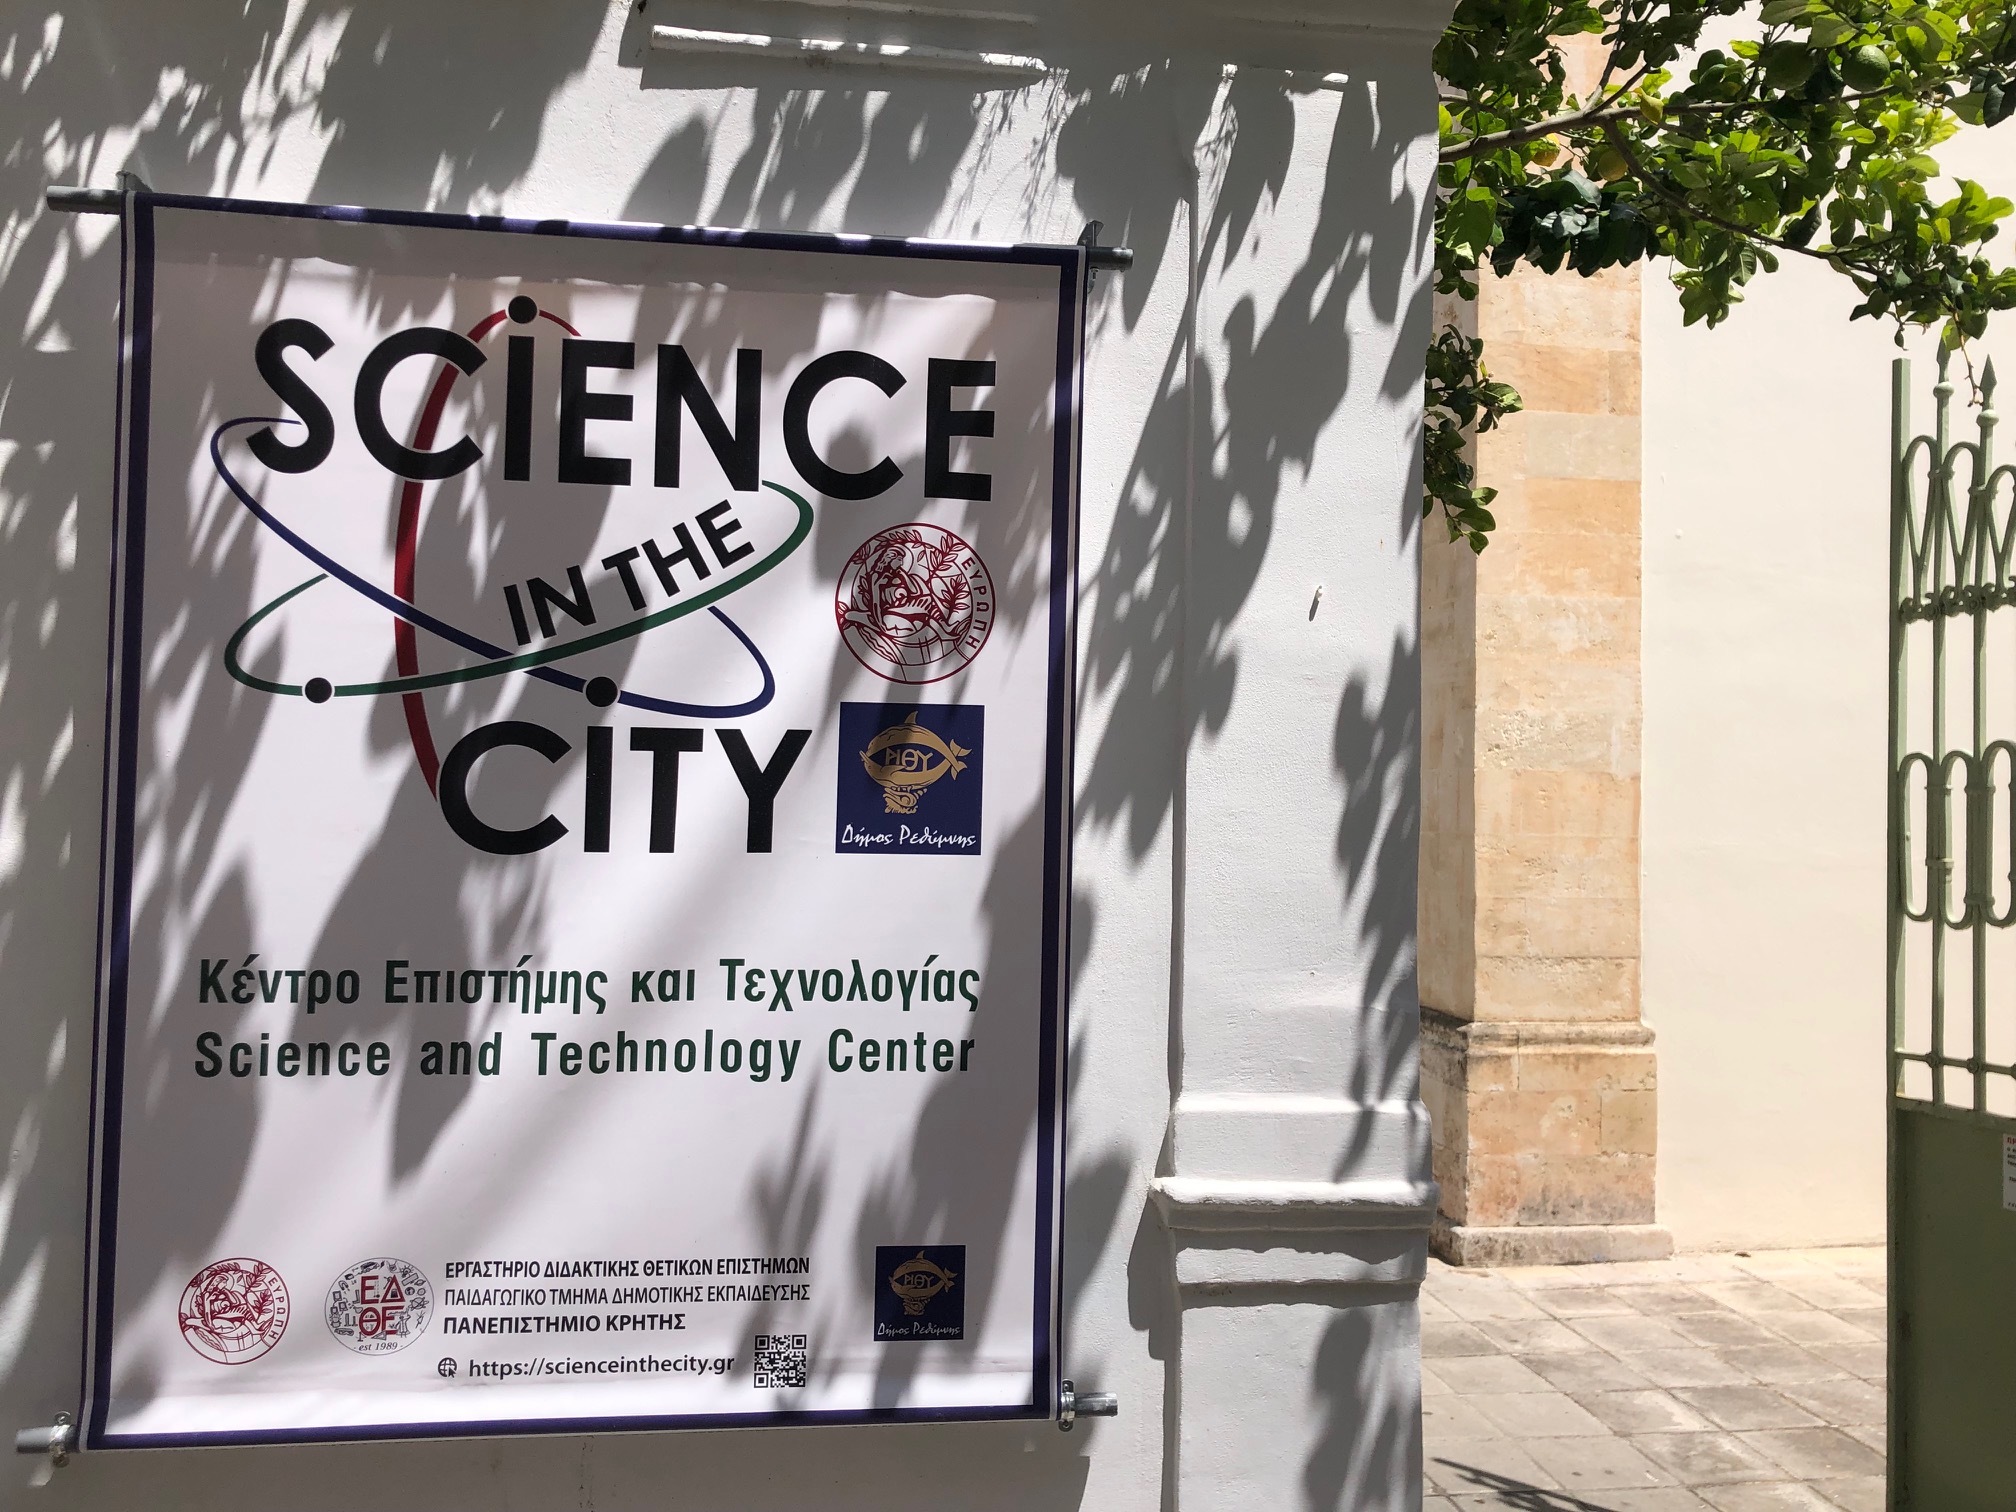 Science in the City - outdoor